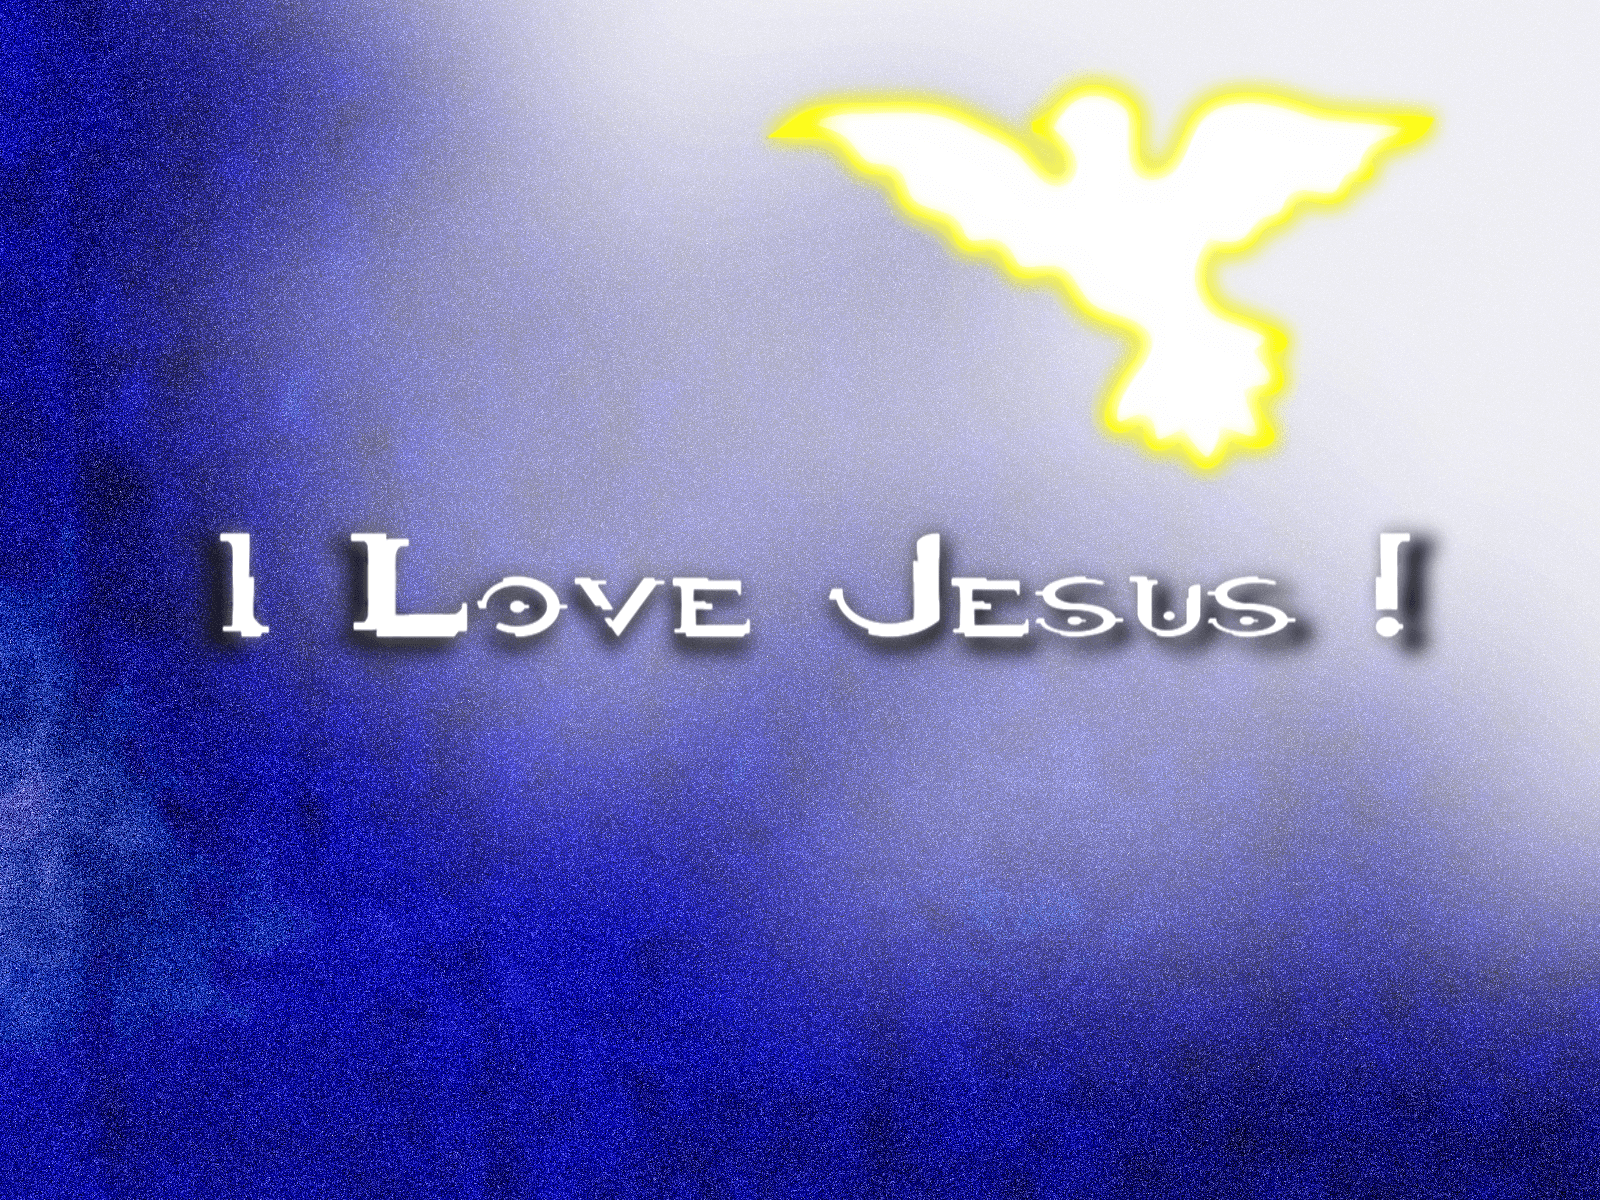 I love you Jesus With all my heart   Happy valentines quotes  Valentine quotes Trust god quotes